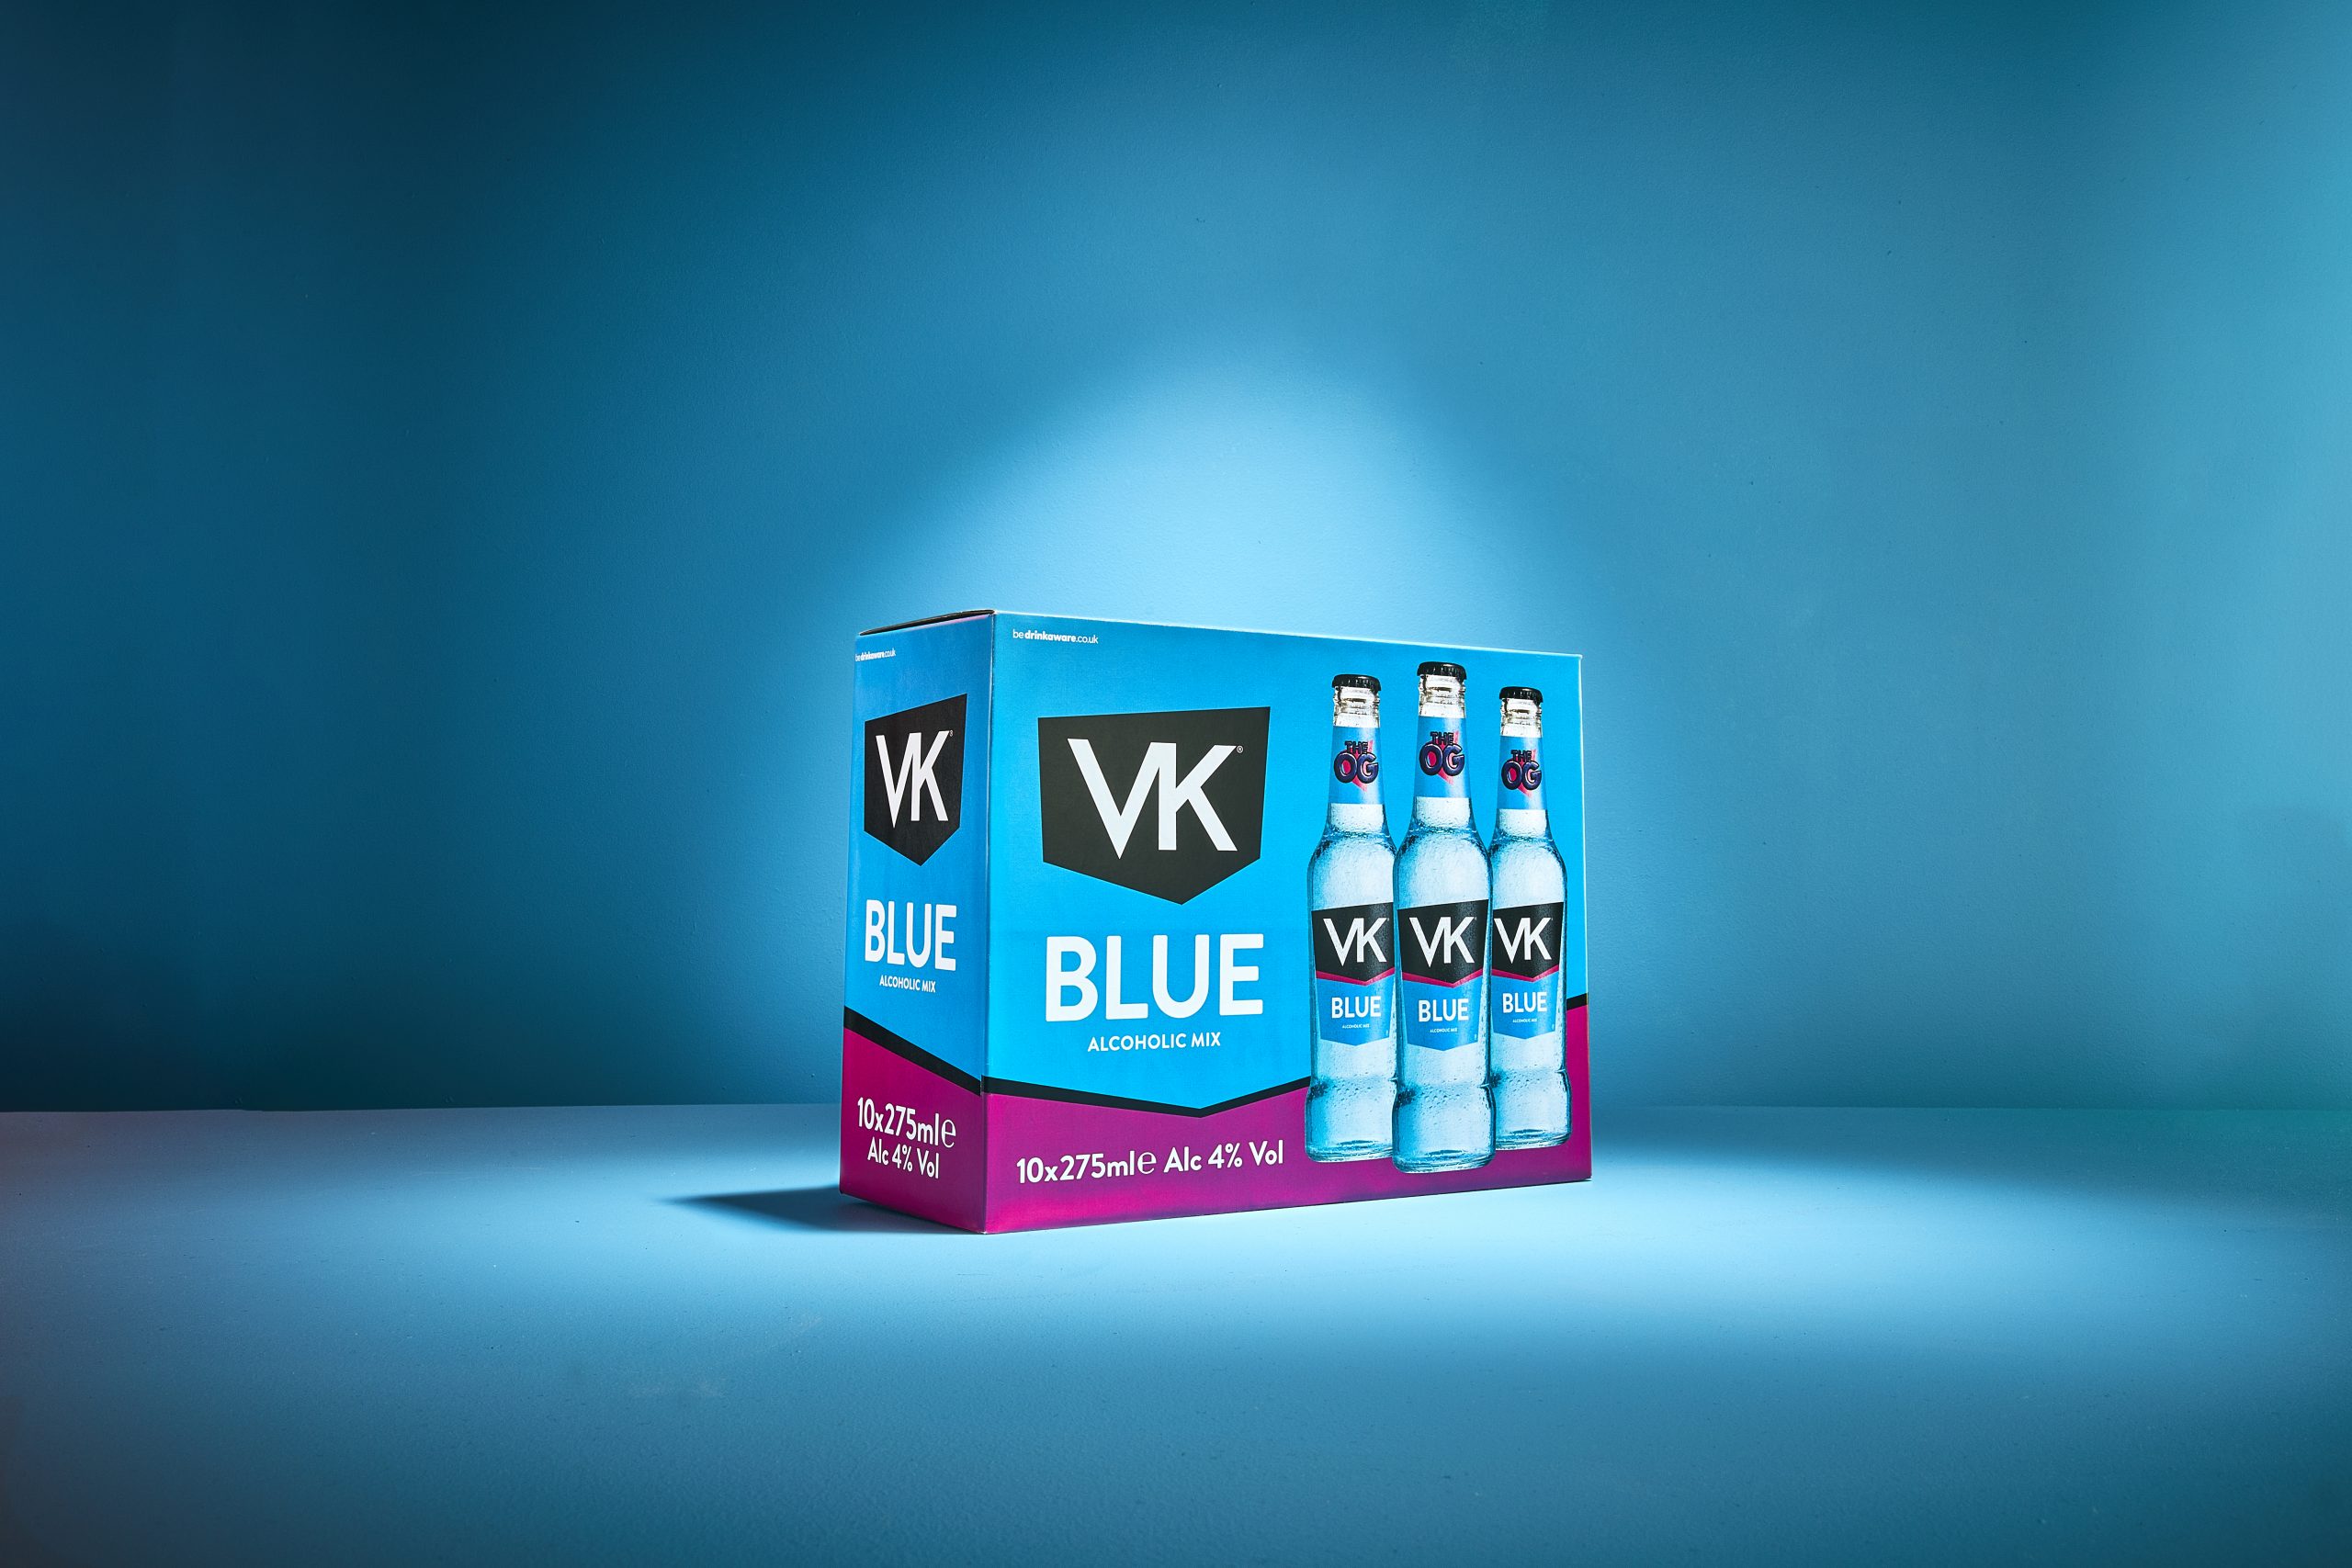 New VK Blue multipack launches into the off trade